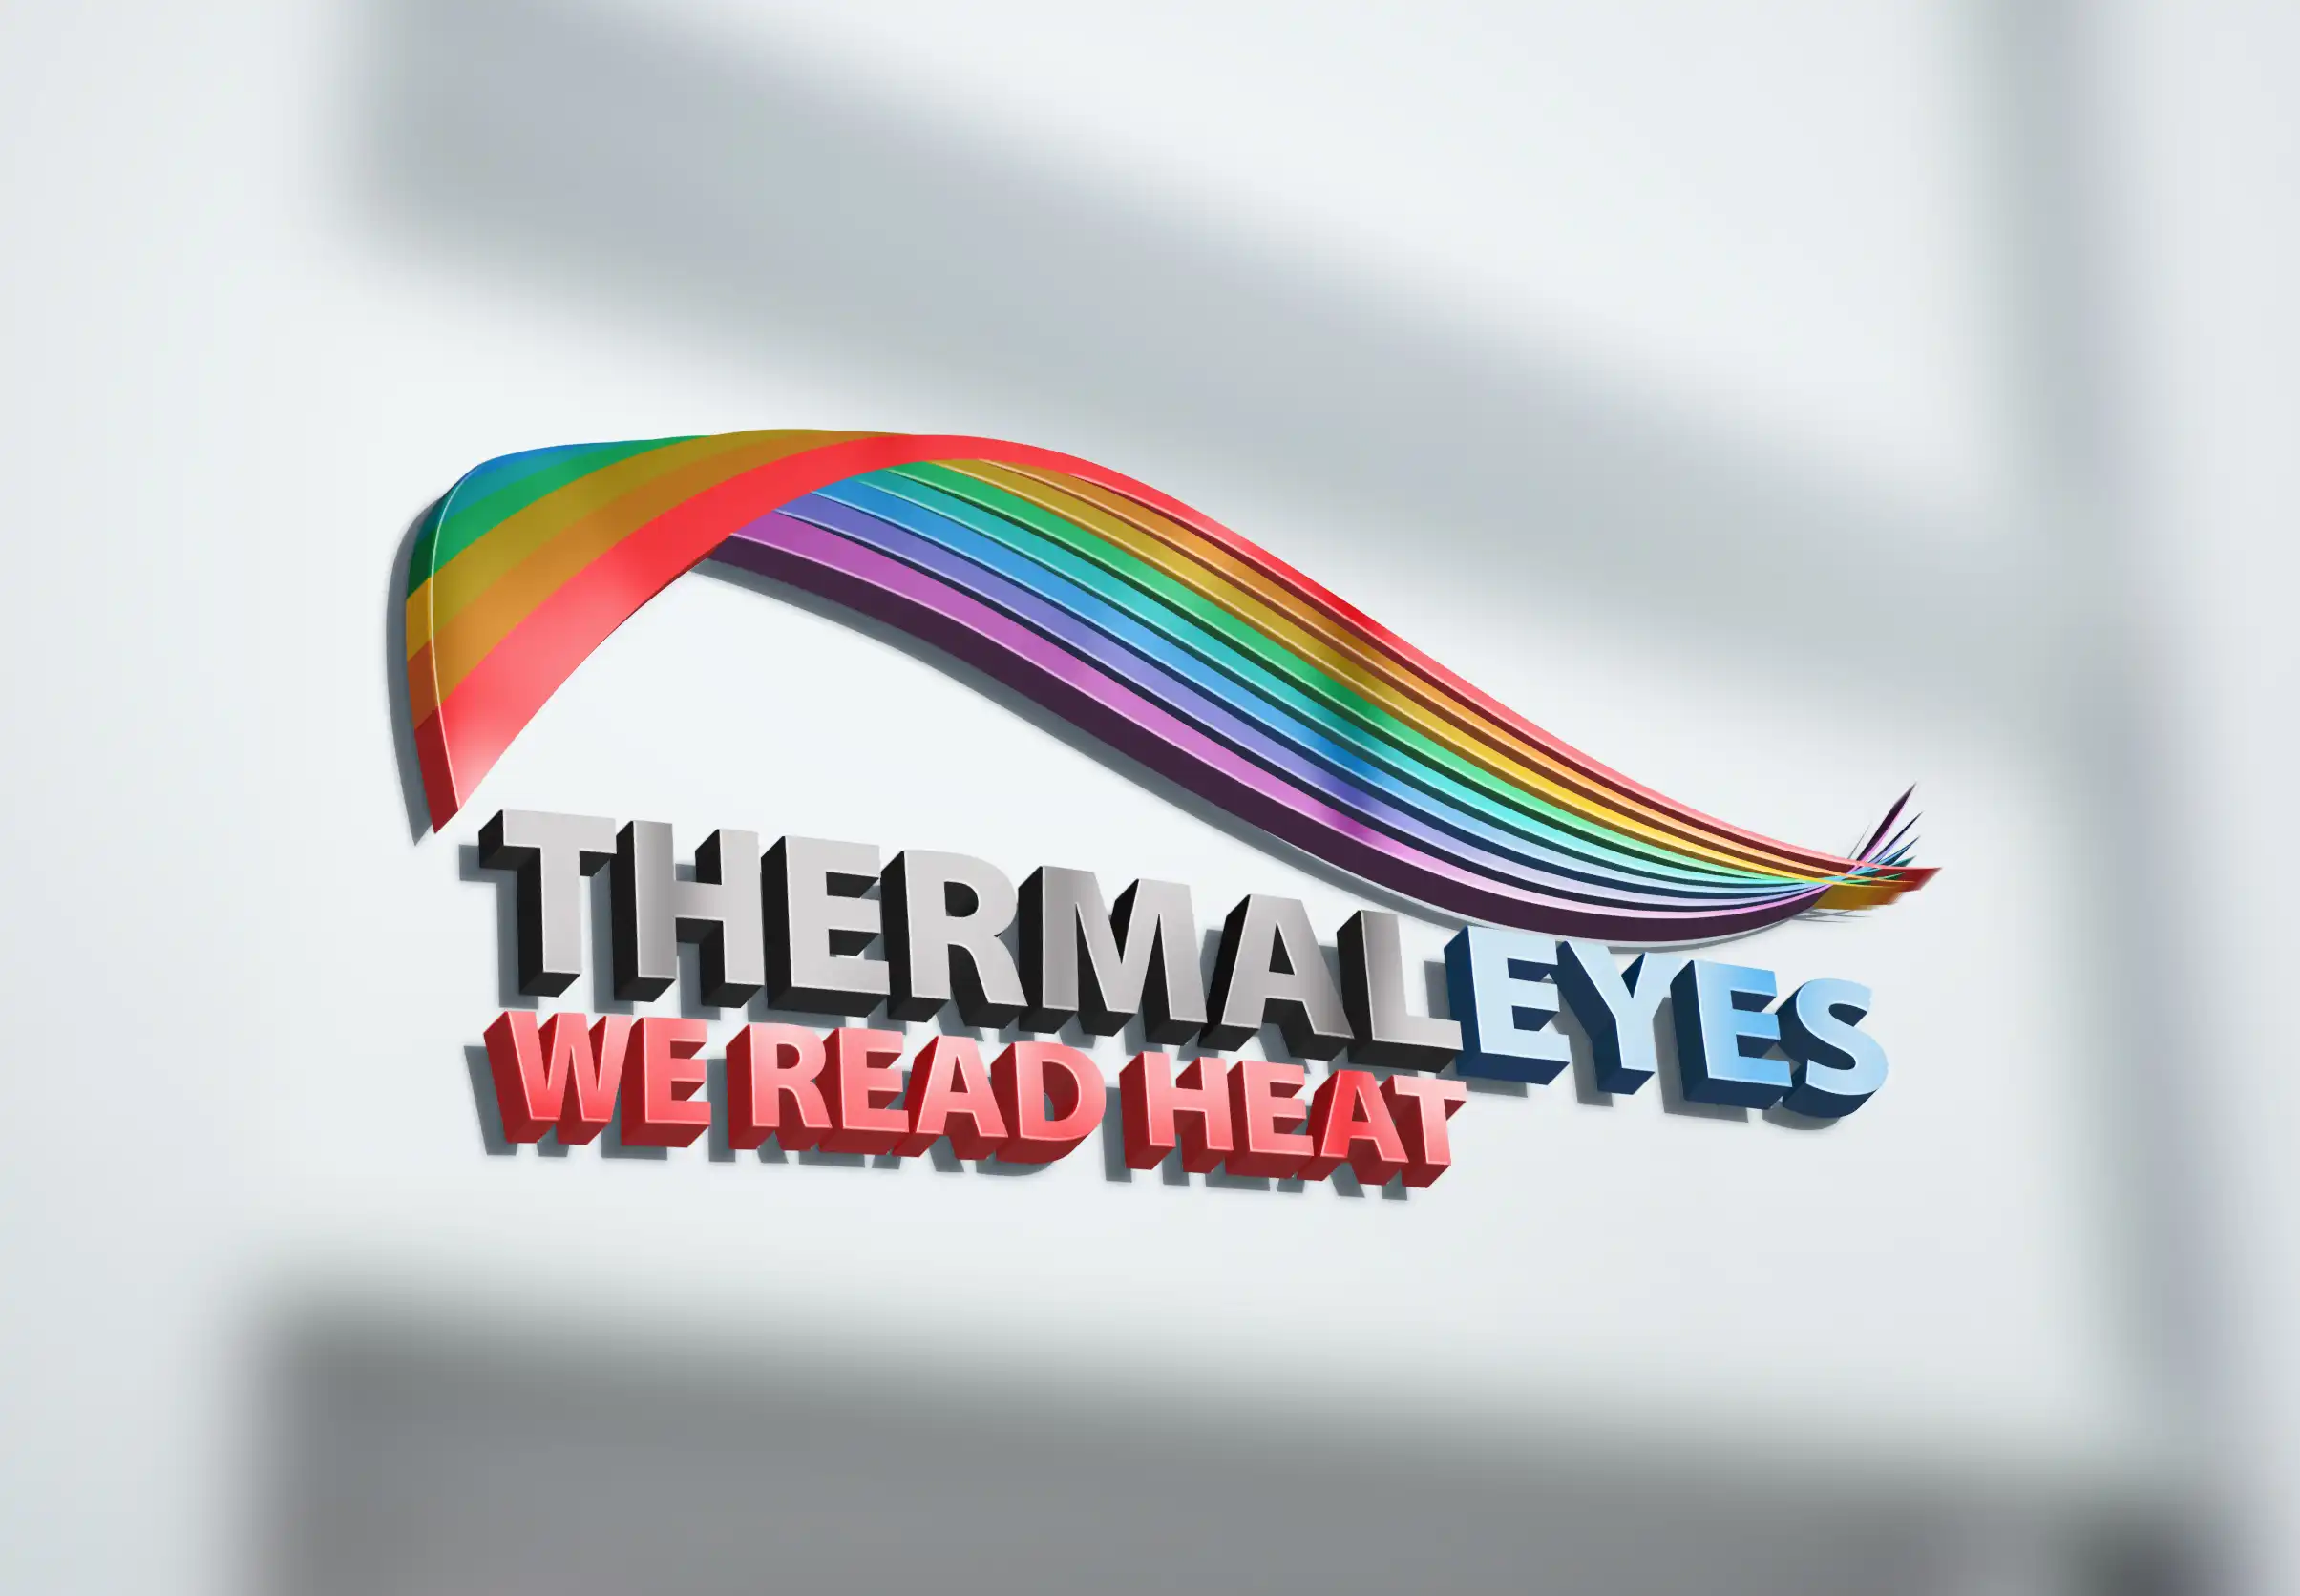 Logo Making made easy for Thermal Eyes in Leeston, Selwyn, Christchurch, Canterbury, NZ. A formal, old styled Logo Design made by XDC.NZ, the super experienced, professional, specialist Logo Designer based in Selwyn NZ